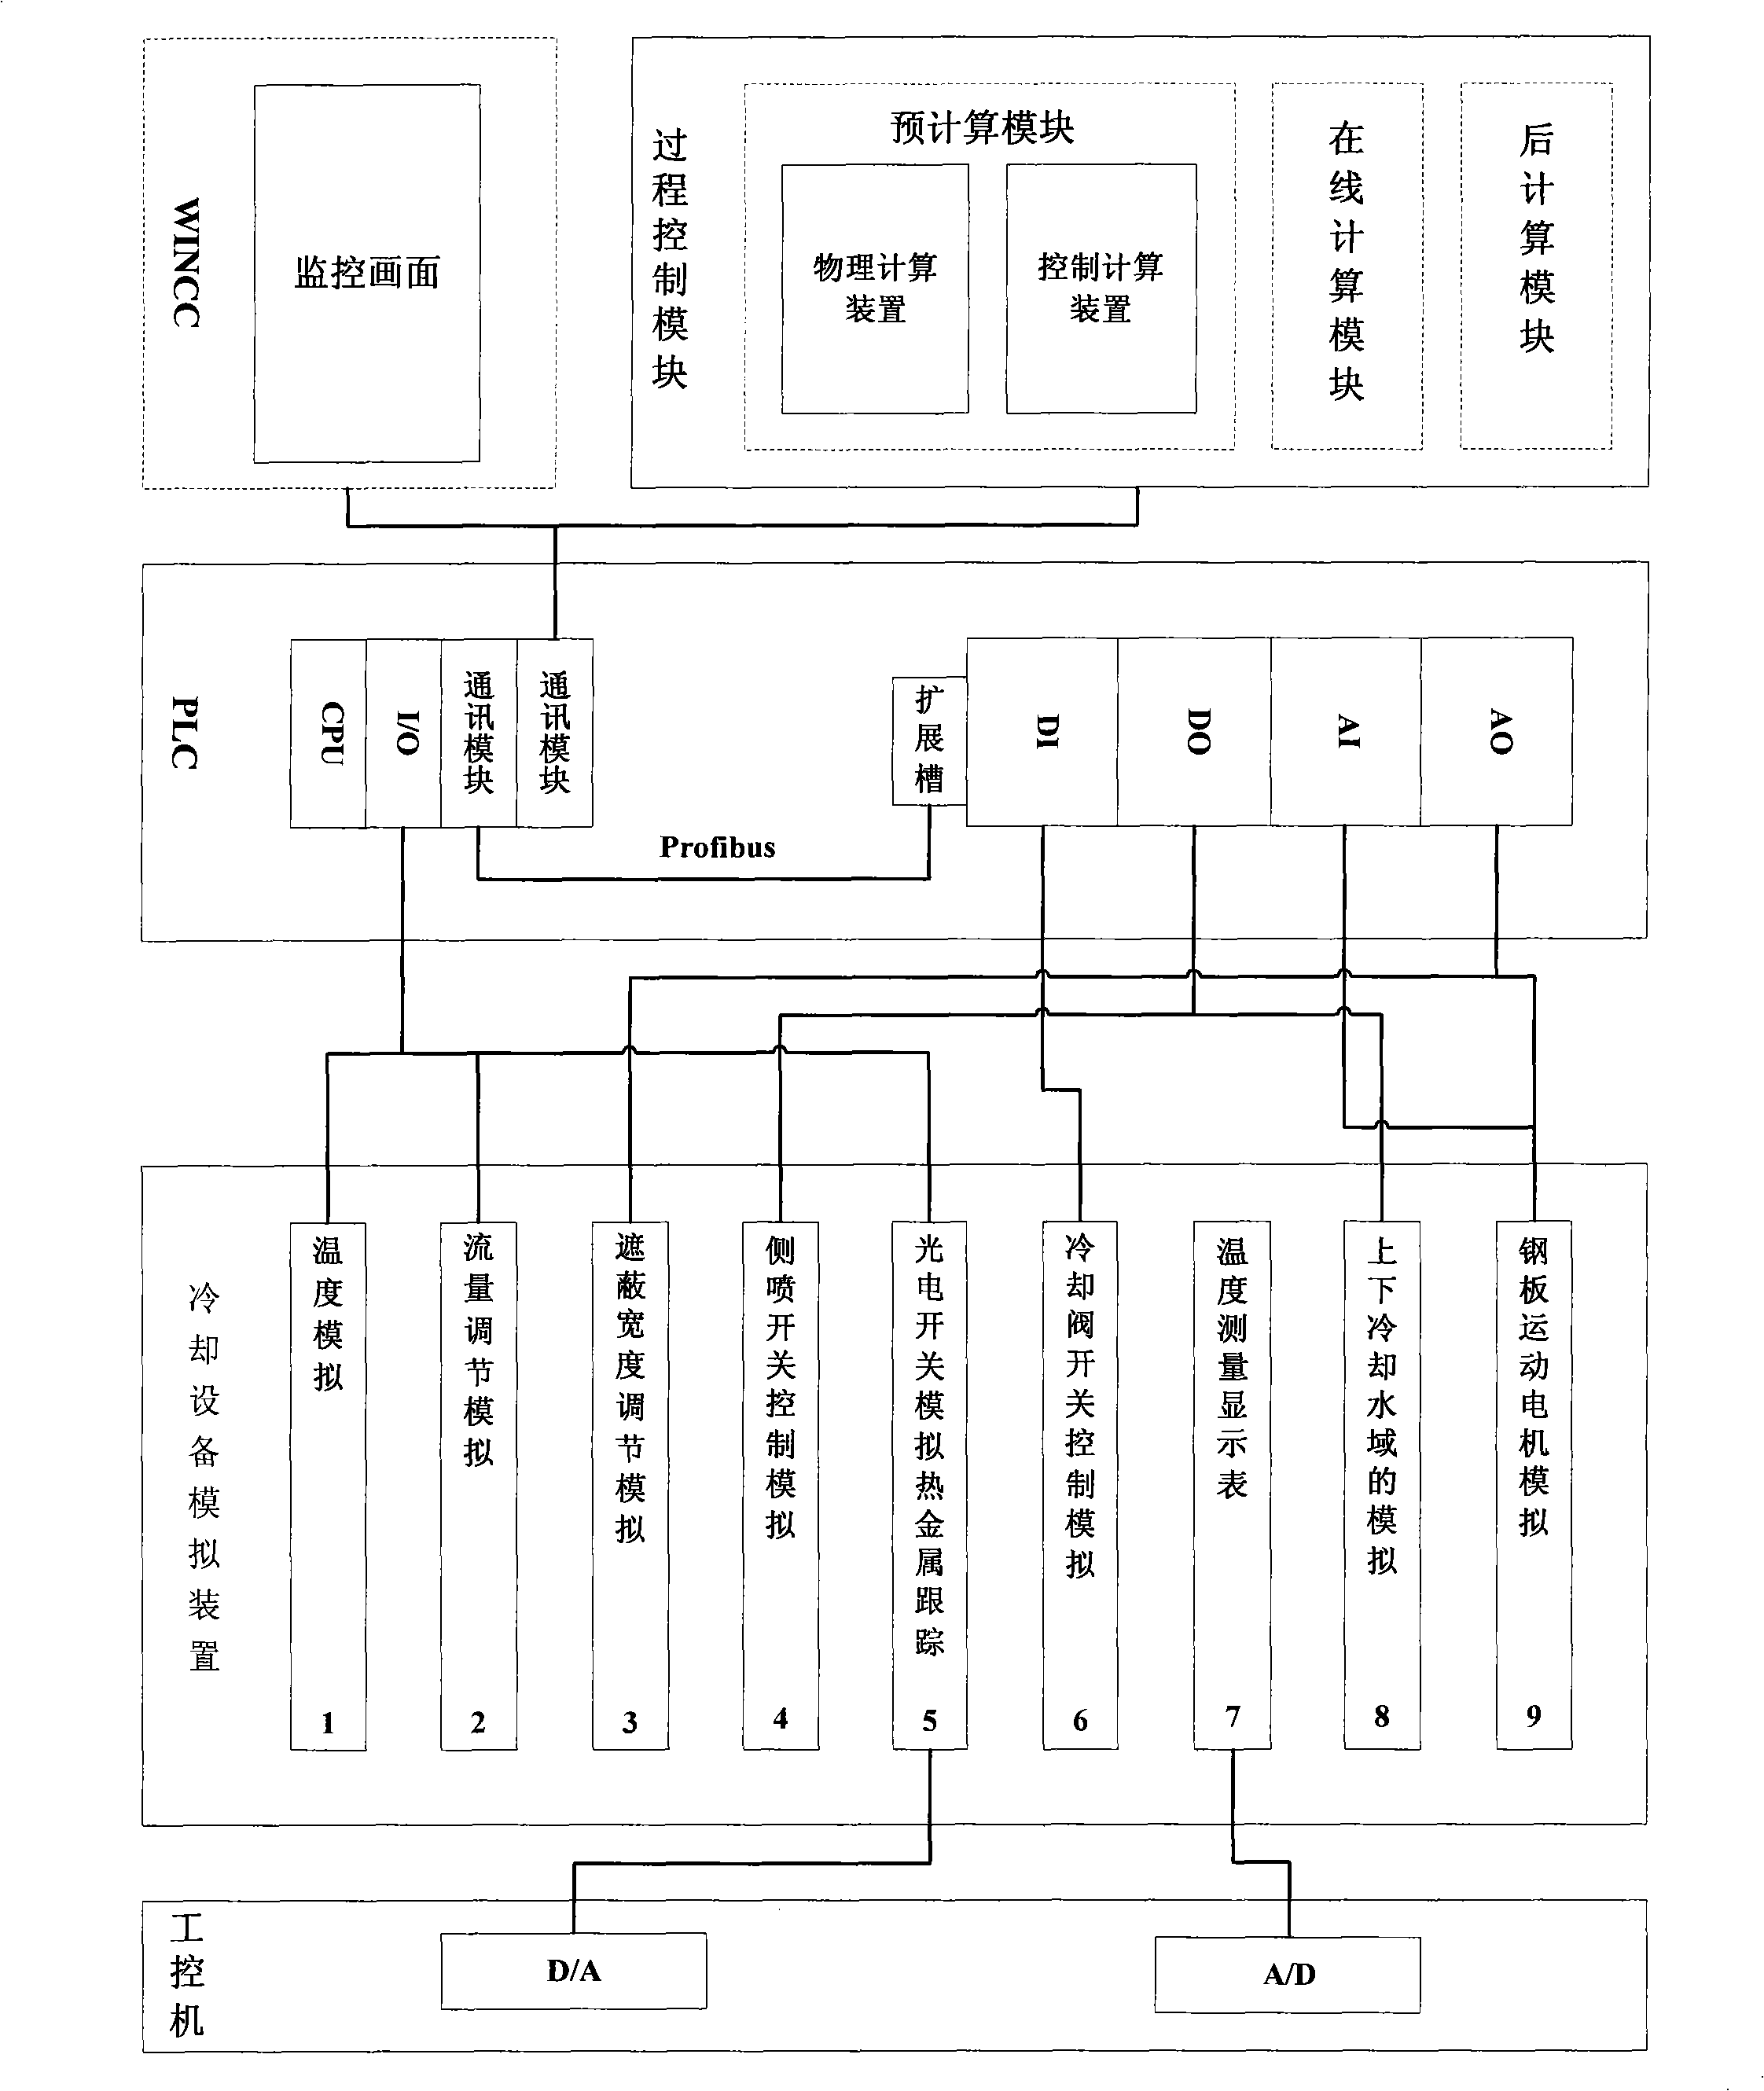 Steel plate cooling control analog system and method